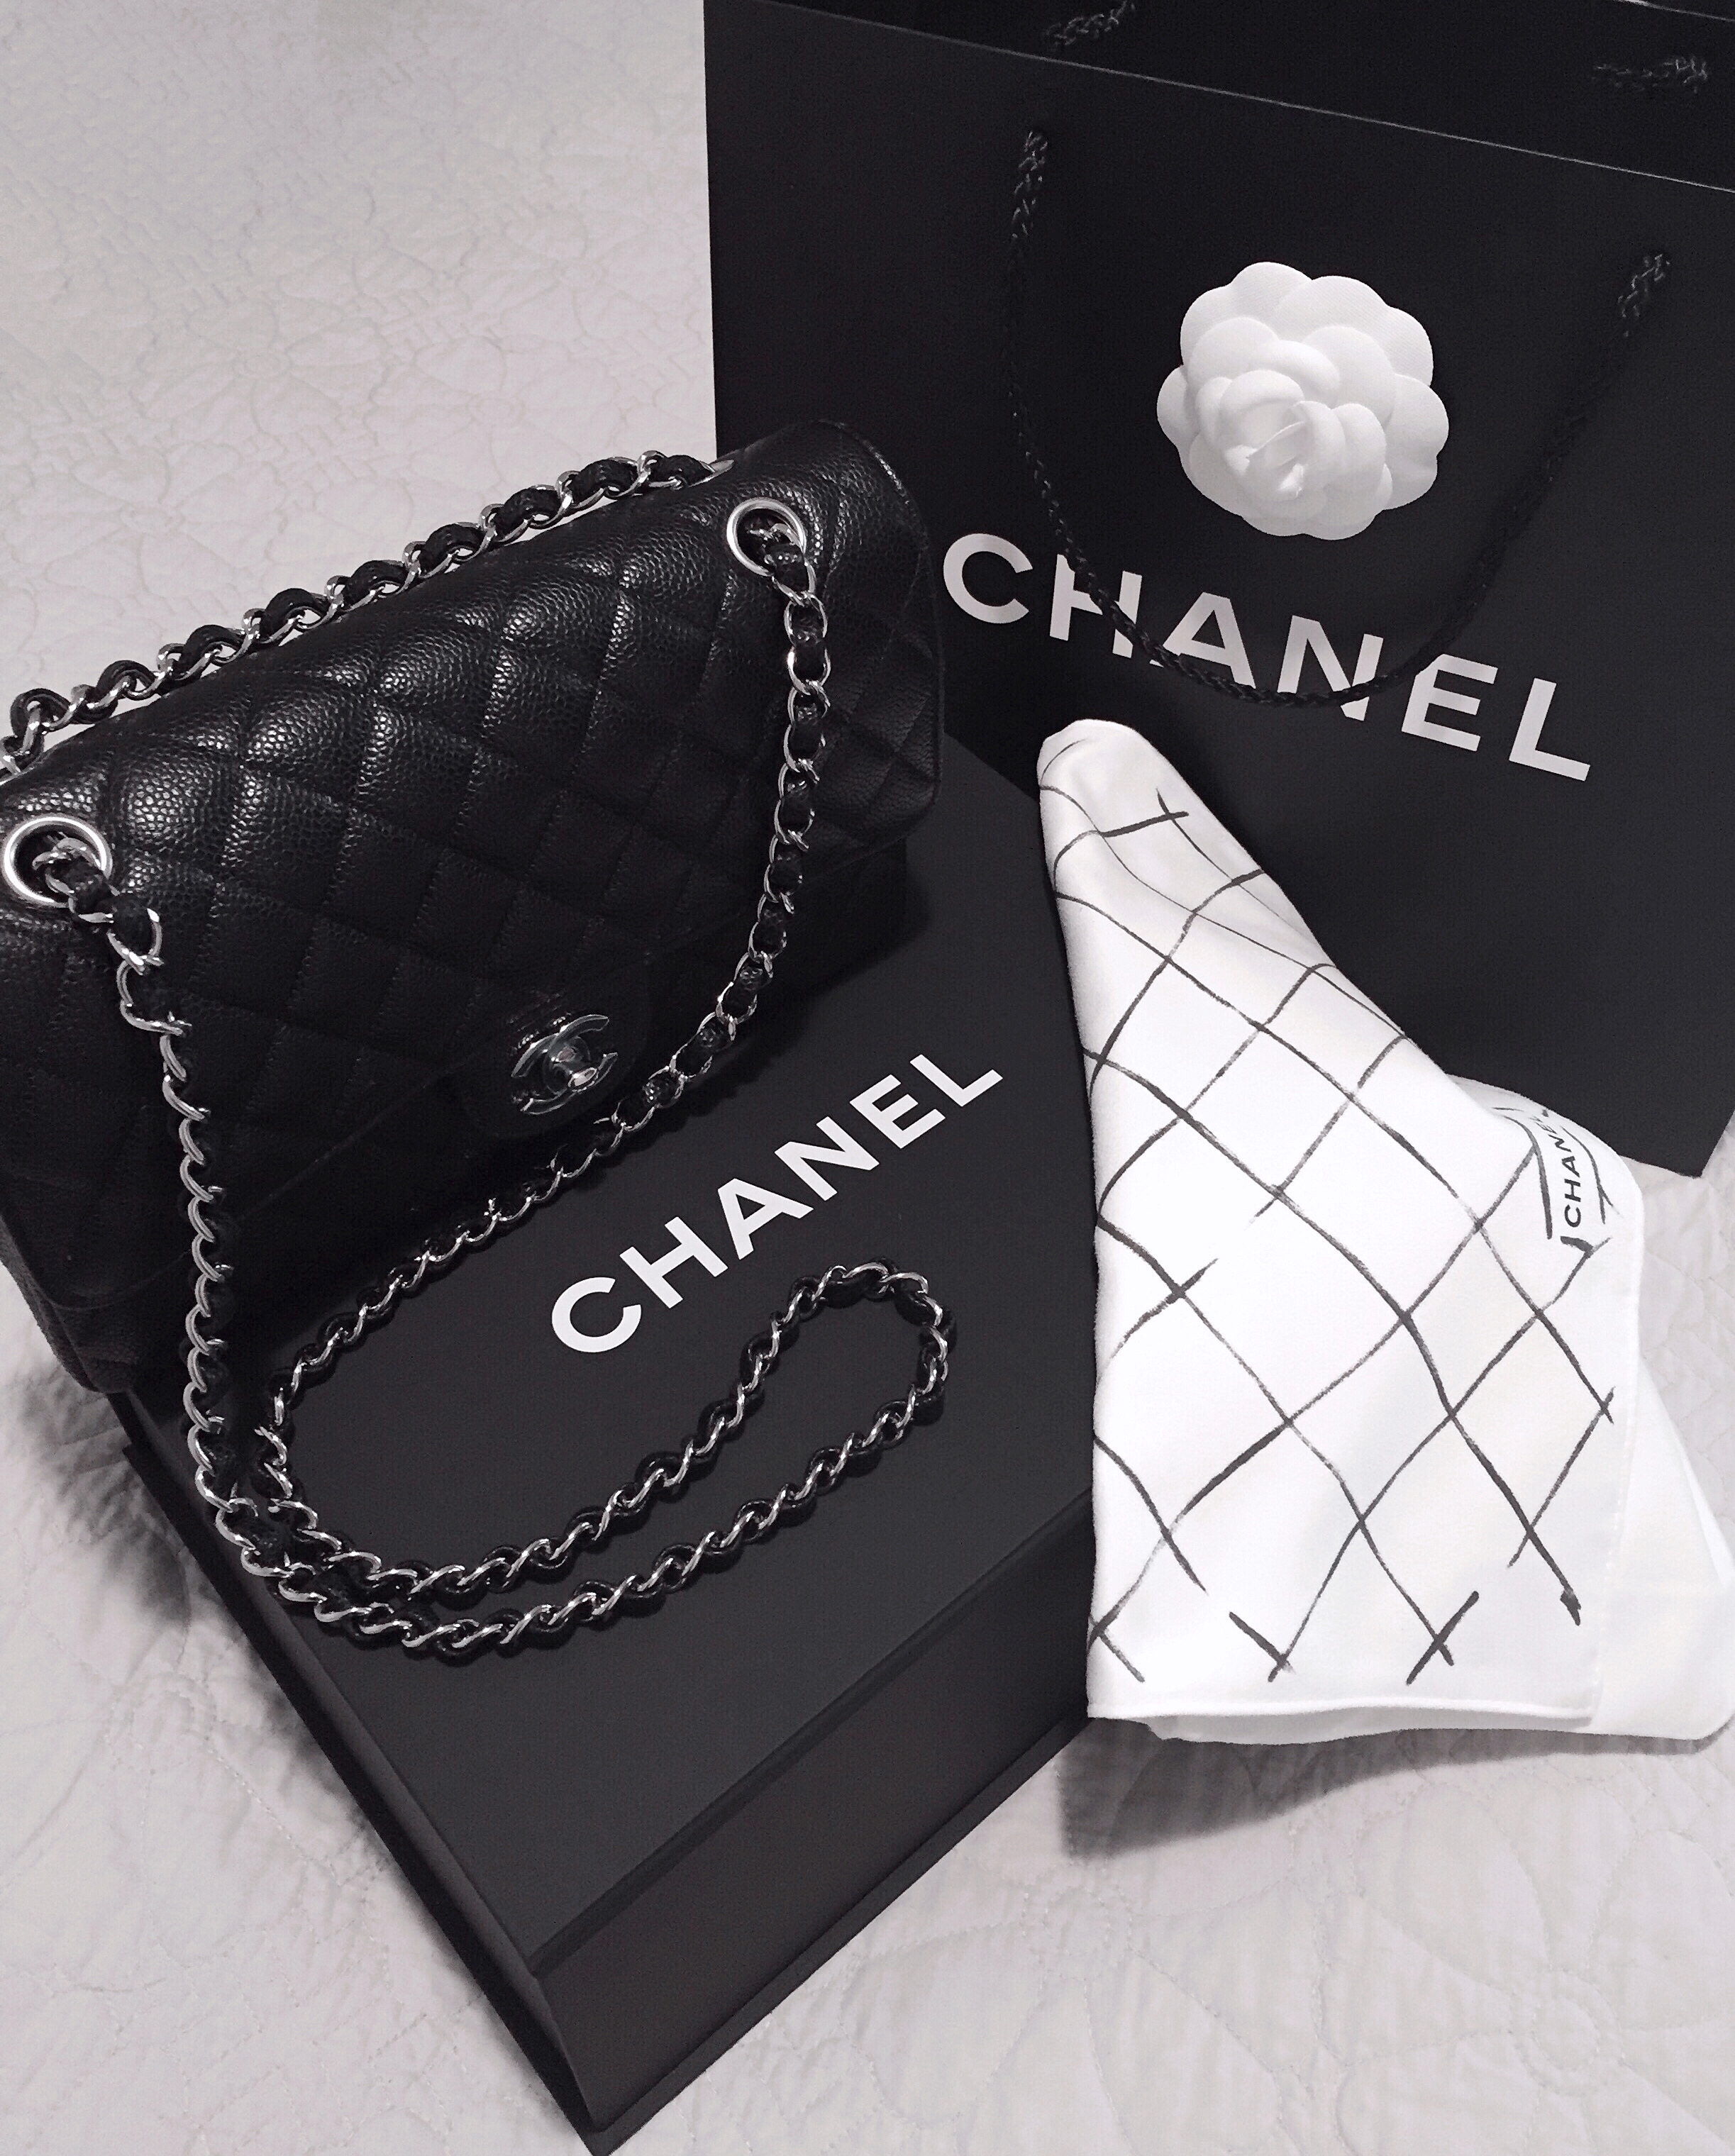 Chanel - Classic flap - investment bag